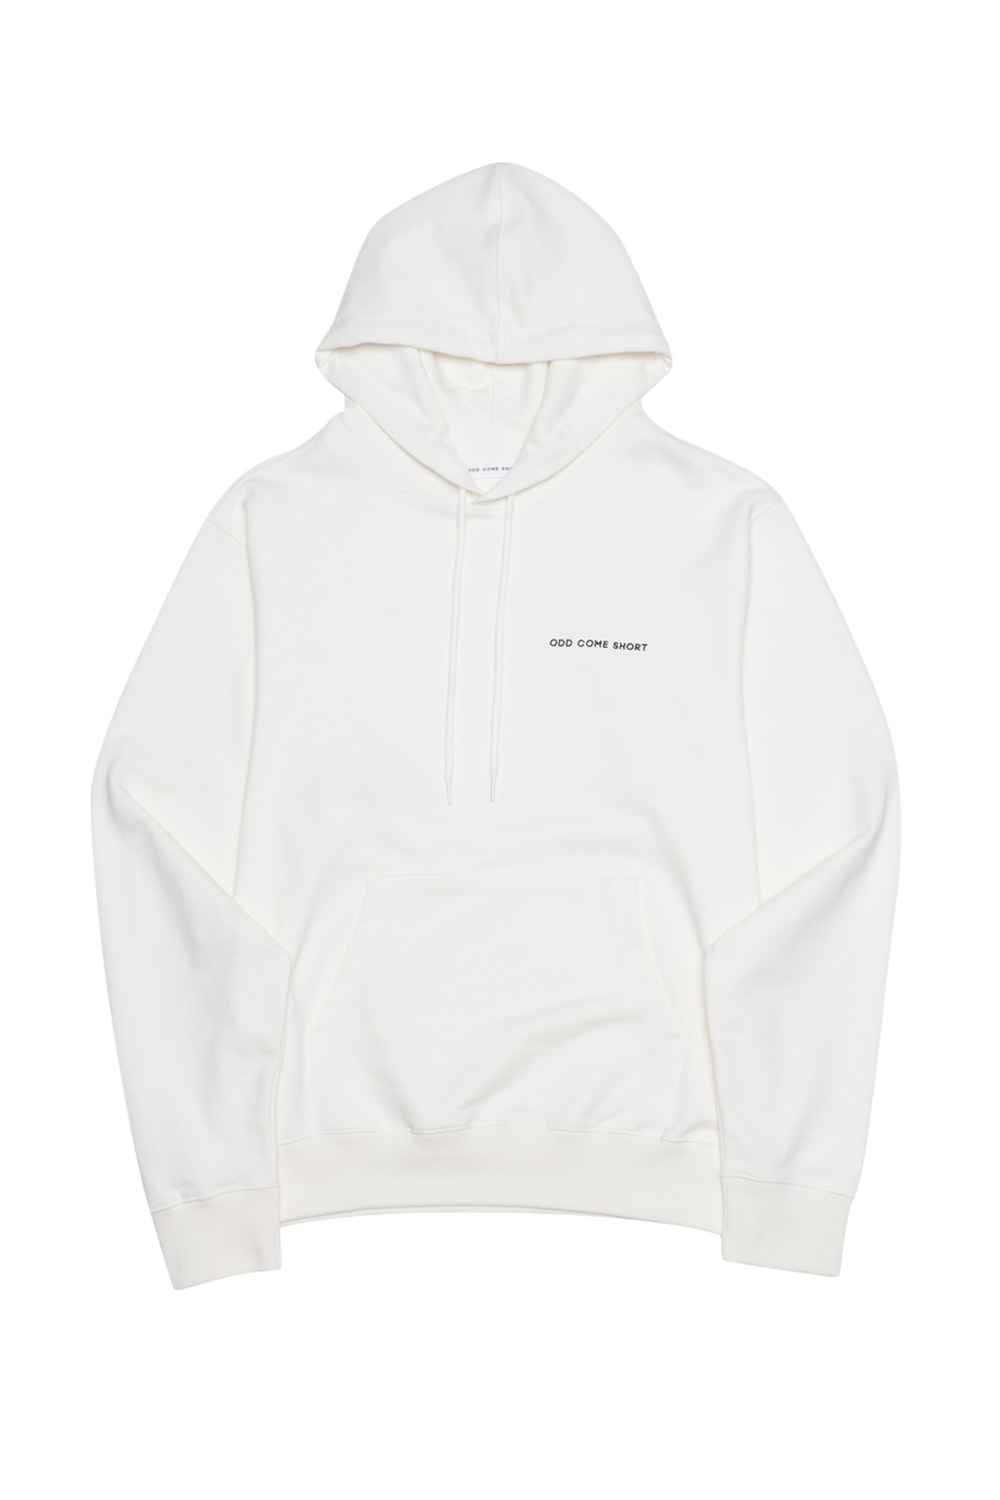 Earth finder hoodie_White